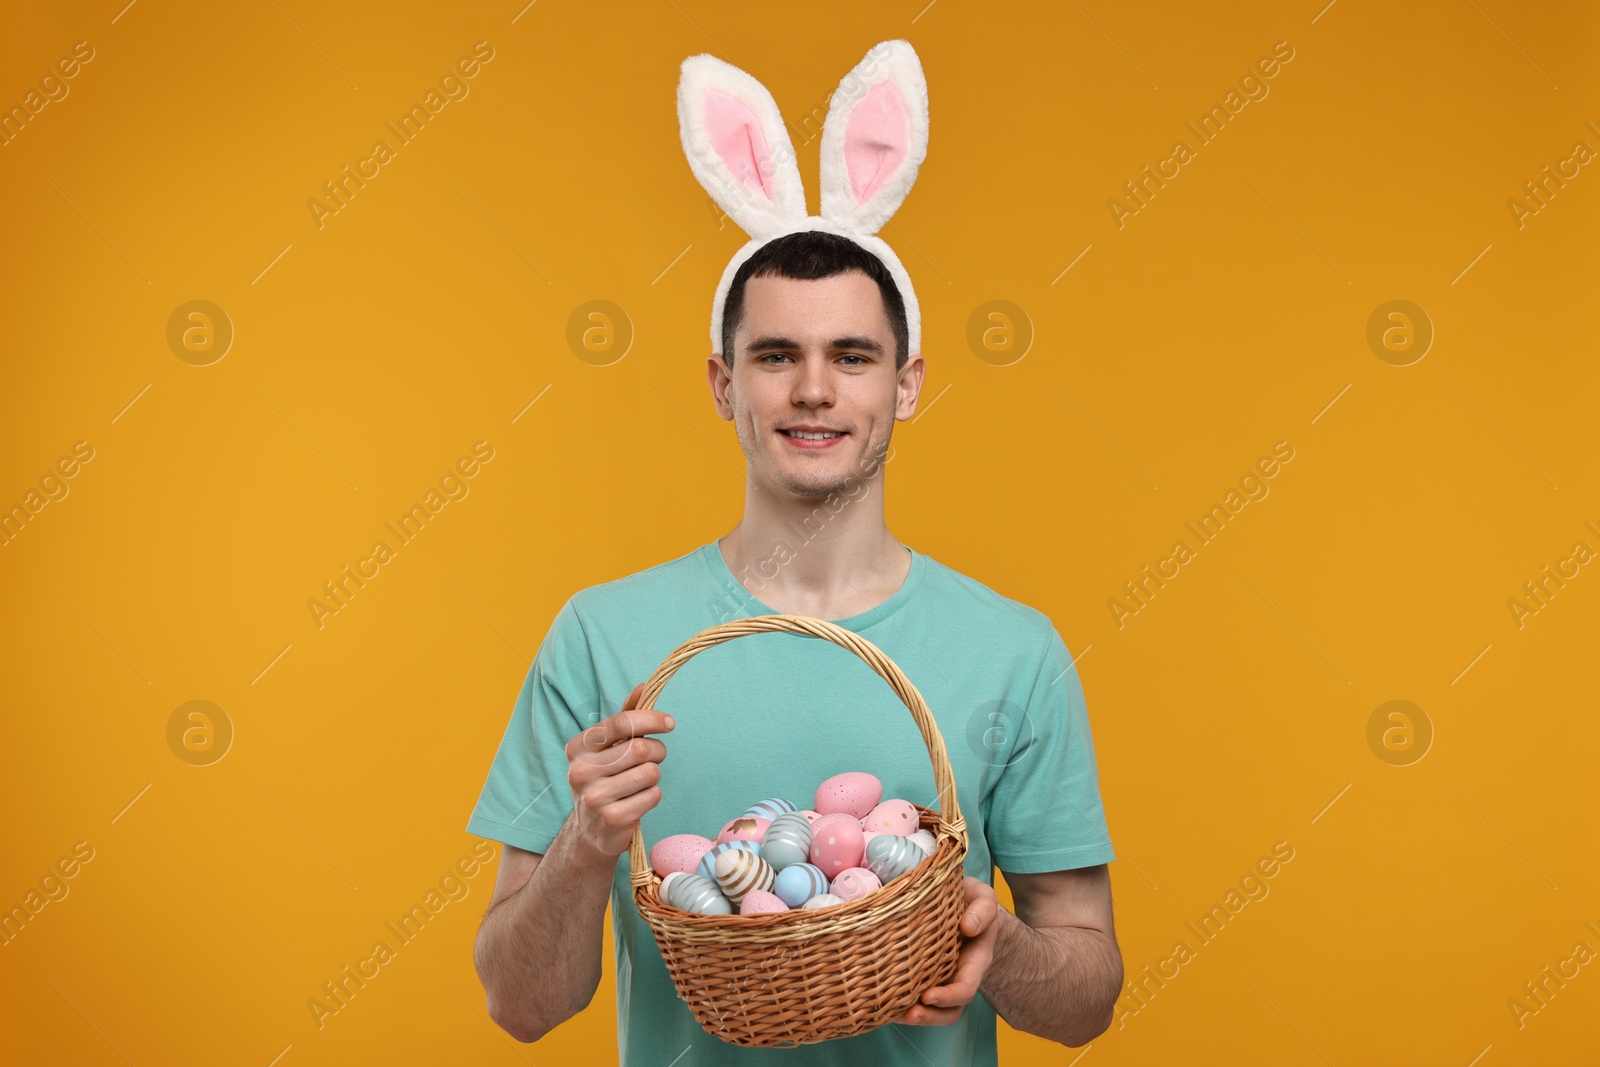 Photo of Easter celebration. Handsome young man with bunny ears holding basket of painted eggs on orange background